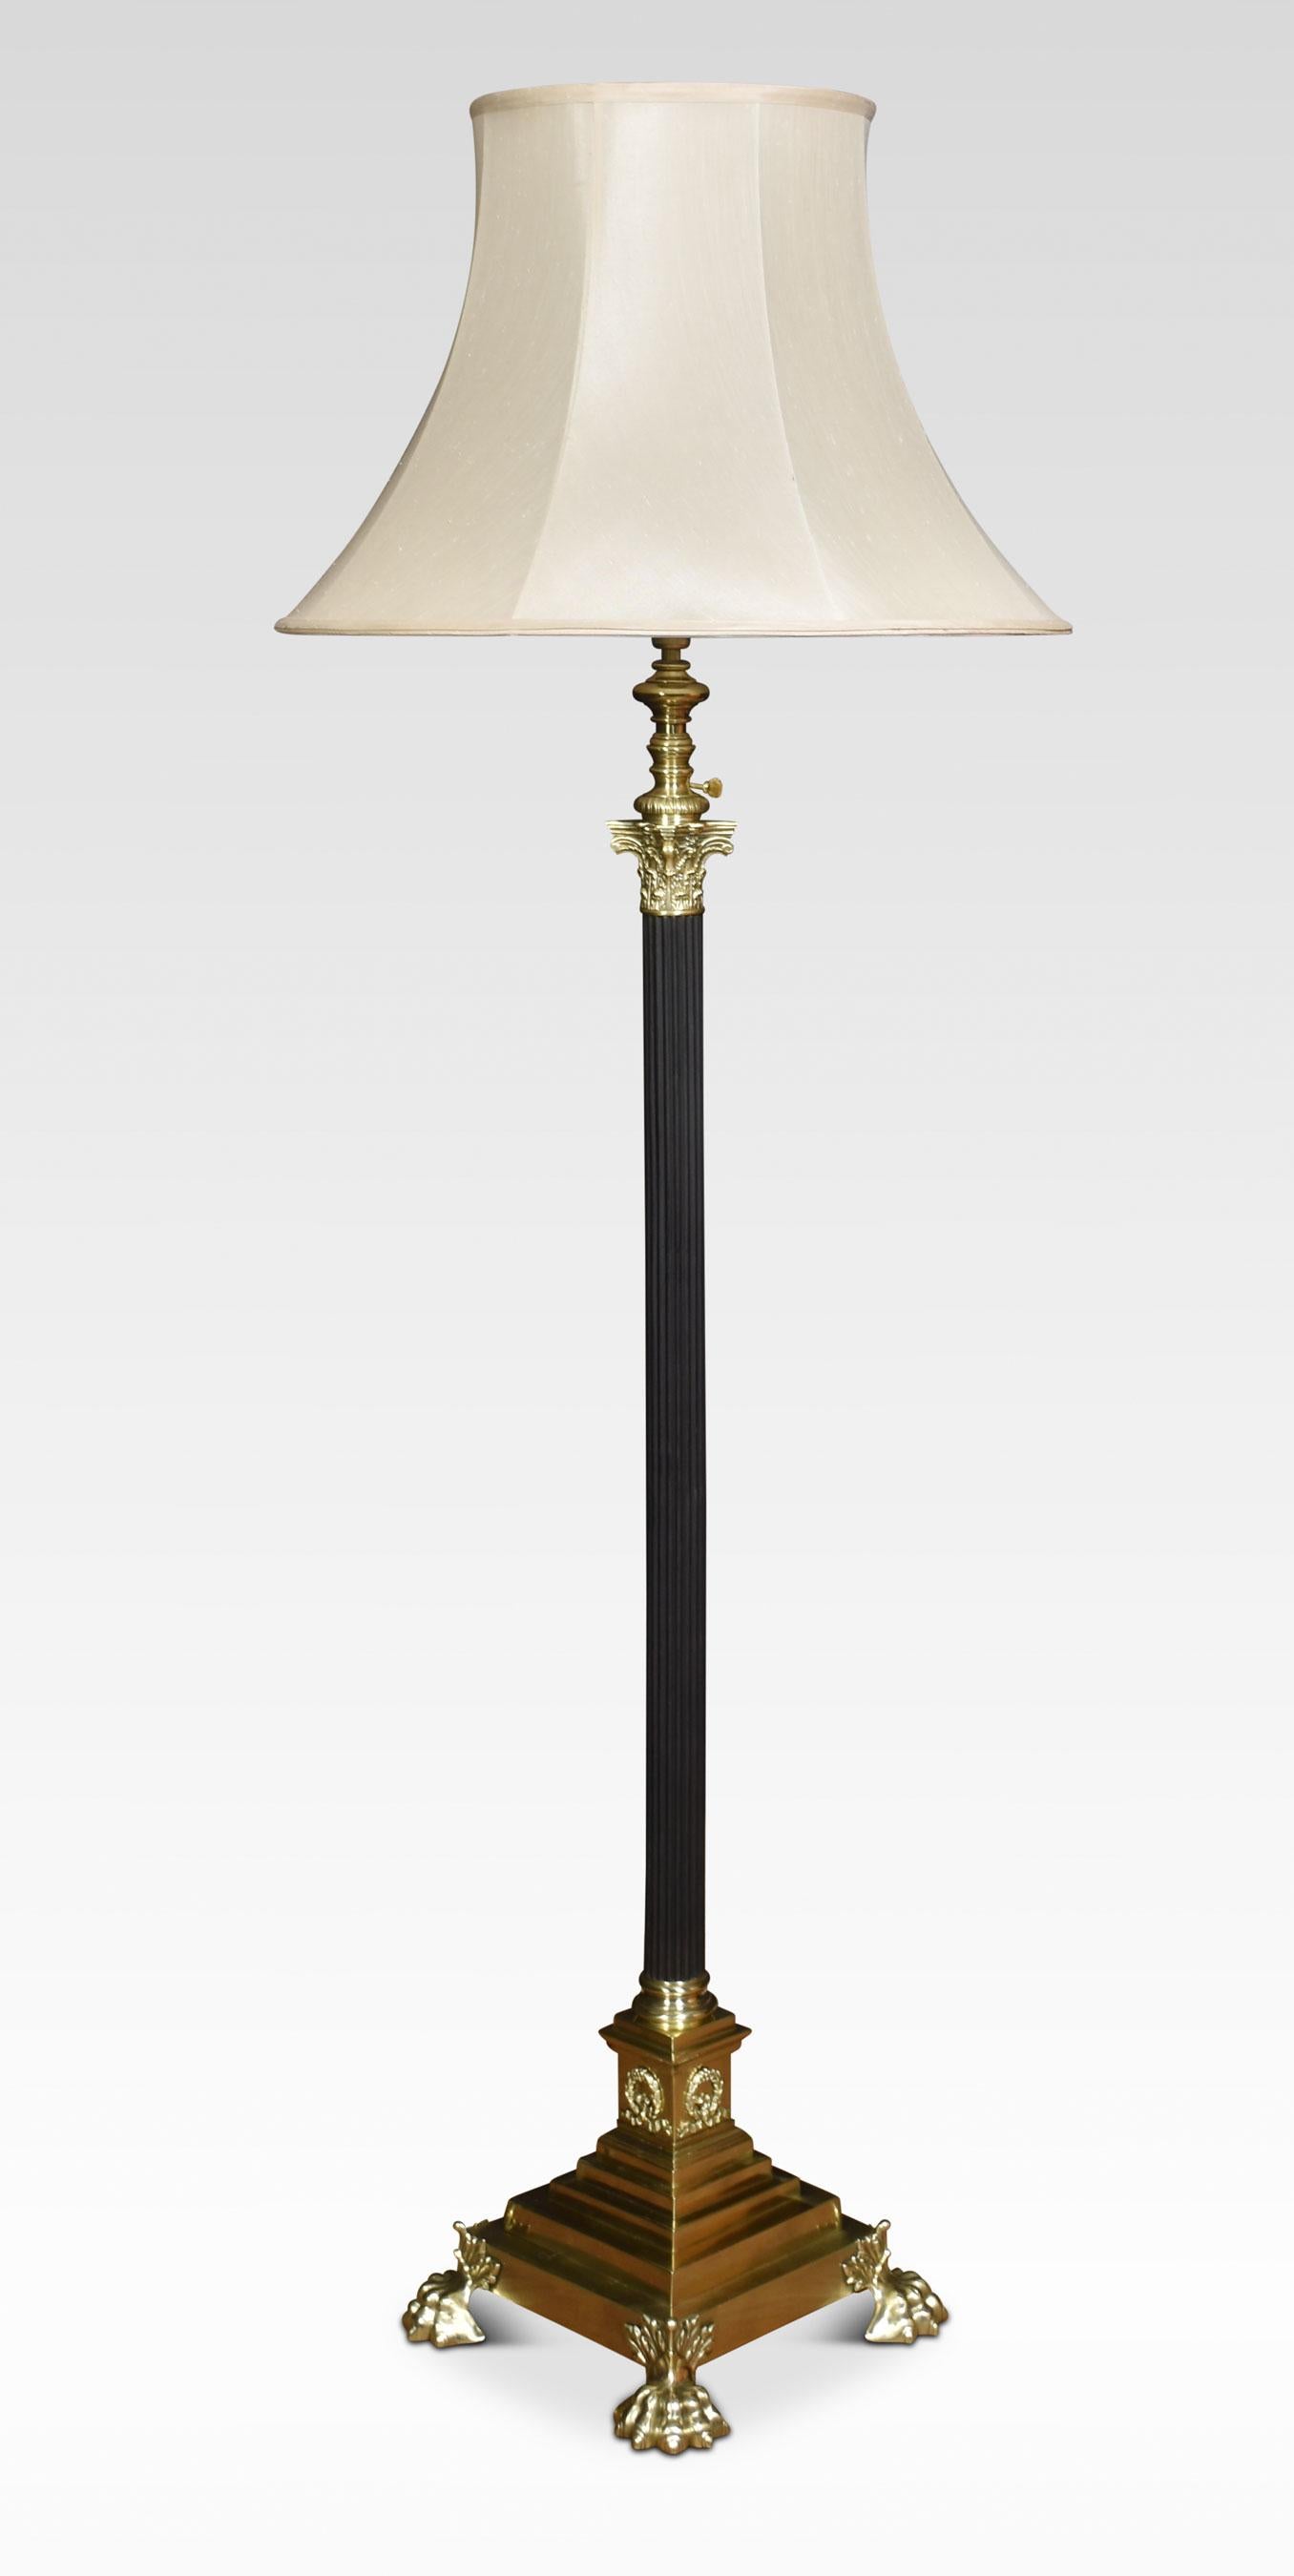 19th Century brass standard lamp. Having ebonized Corinthian column and adjustable stem, on a stepped square base with paw feet. Converted for electricity.
Dimensions
Height 49.5 Inches adjustable to 71 Inches
Width 12 Inches
Depth 12 Inches.